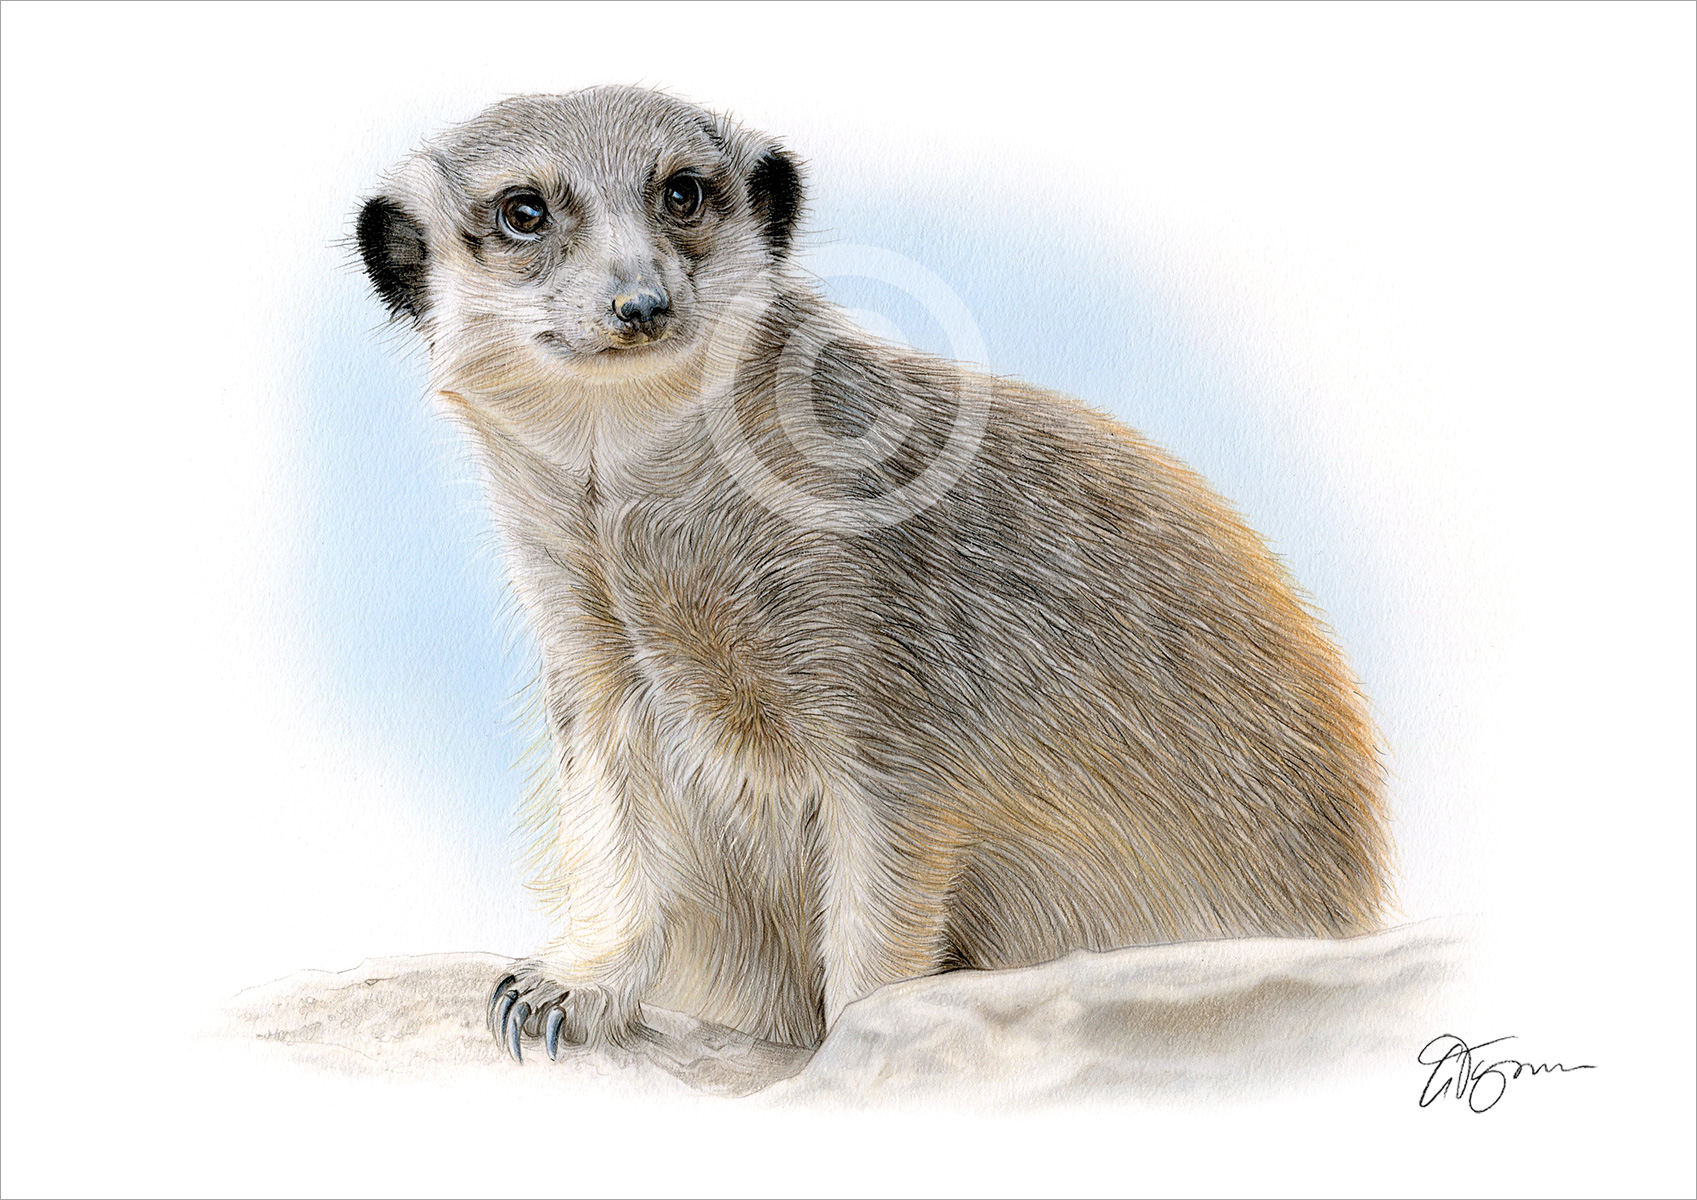 Colour pencil drawing of a young meerkat by artist Gary Tymon